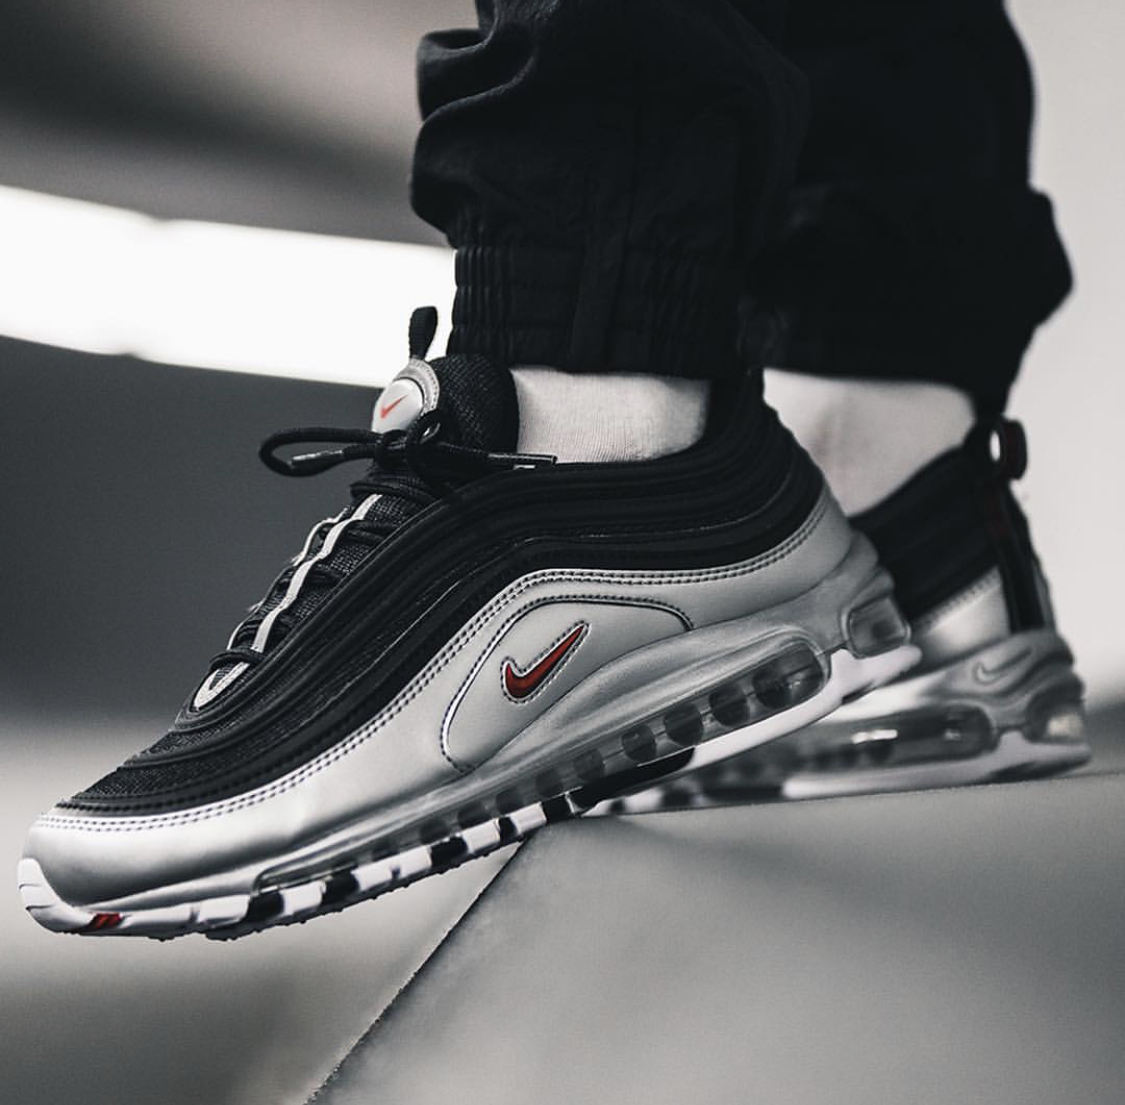 Now Available: Nike Air 97 QS "Metallic Silver"